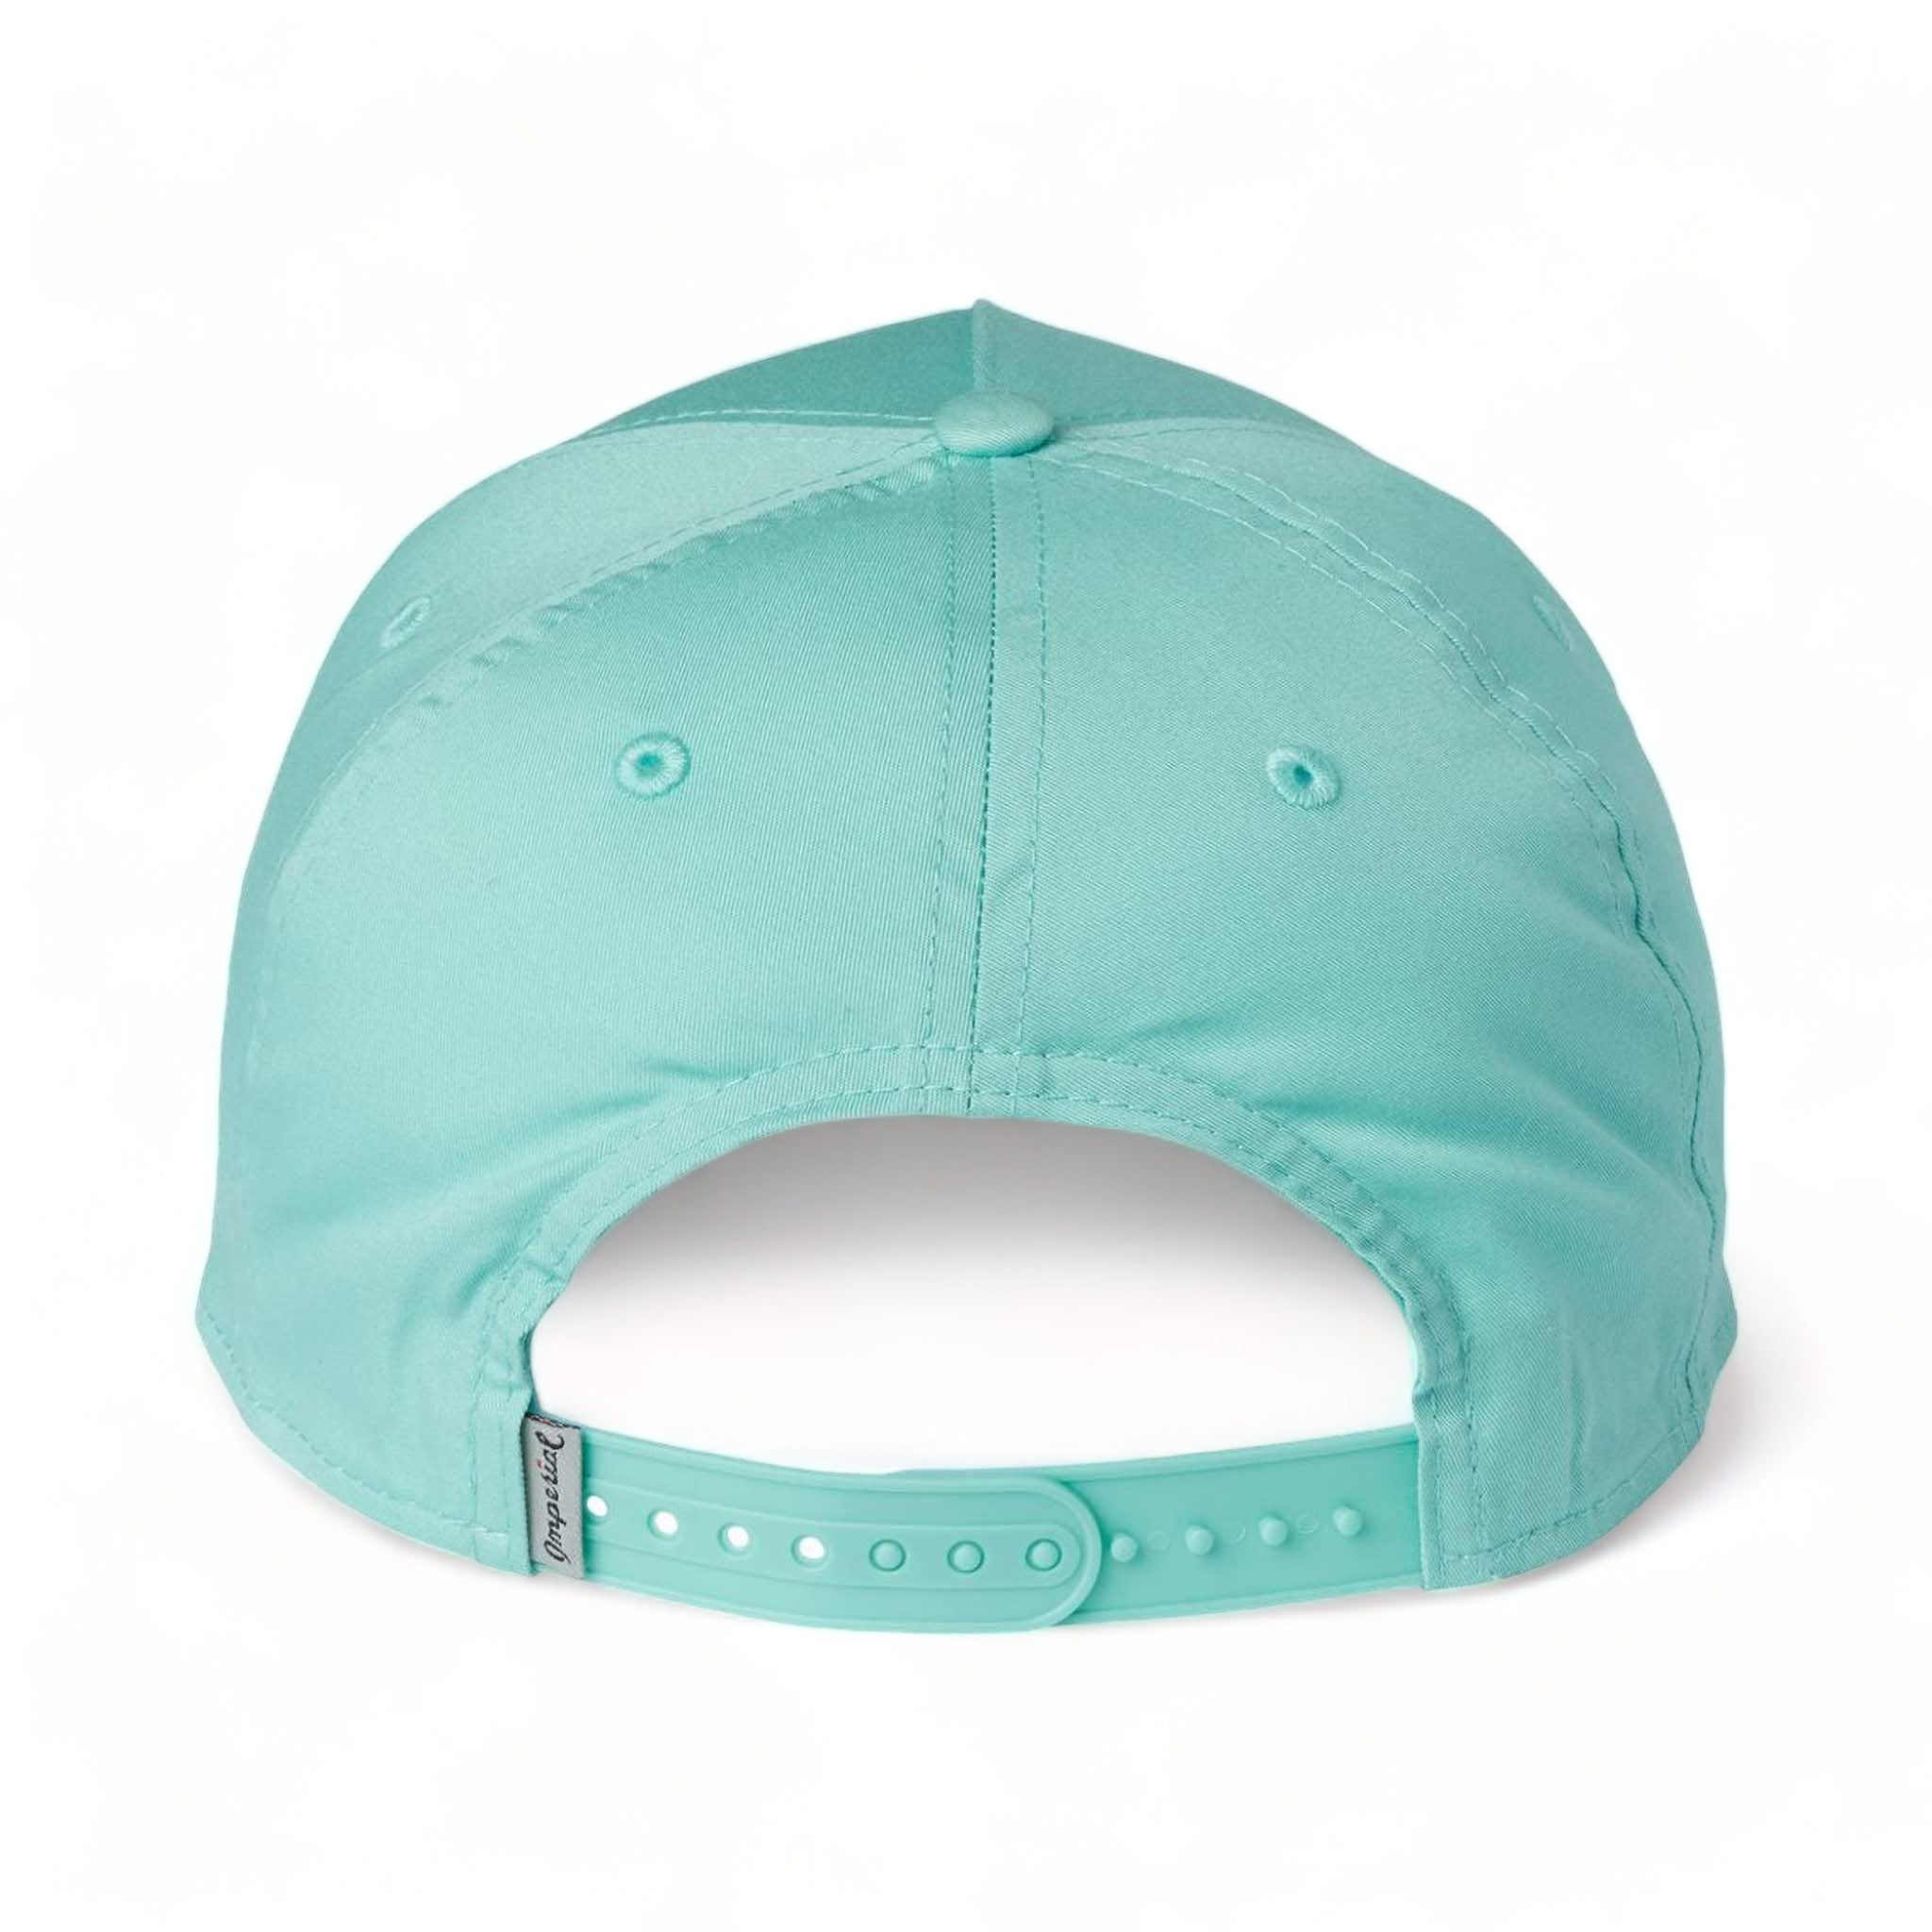 Back view of Imperial 5056 custom hat in sea green and white